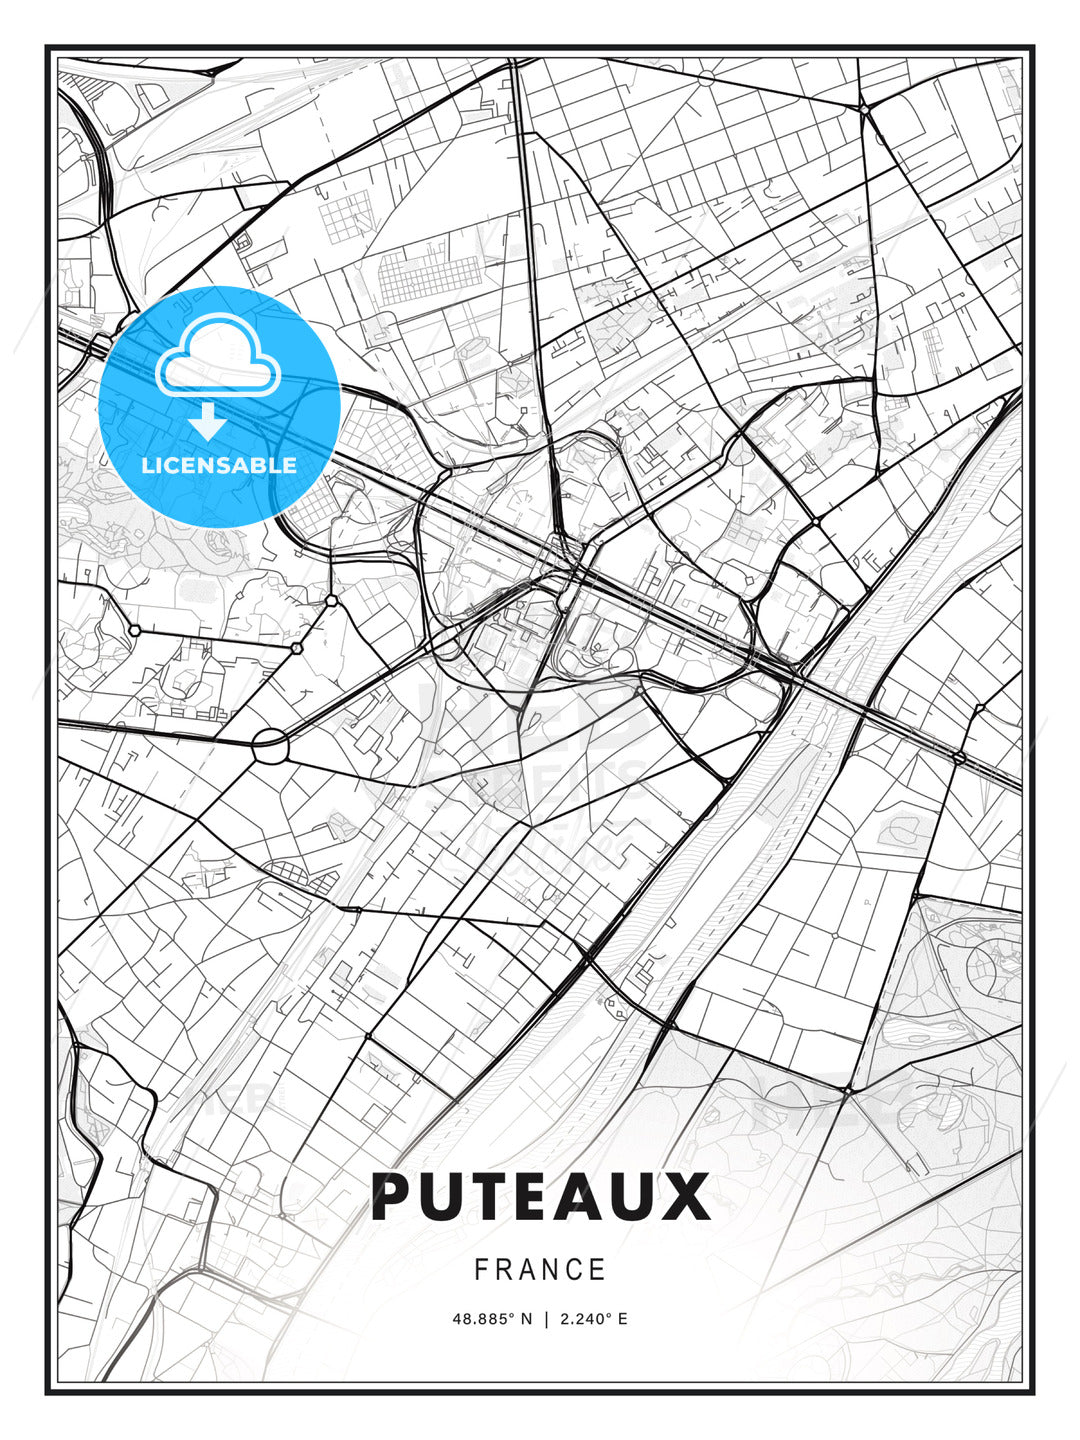 Puteaux, France, Modern Print Template in Various Formats - HEBSTREITS Sketches